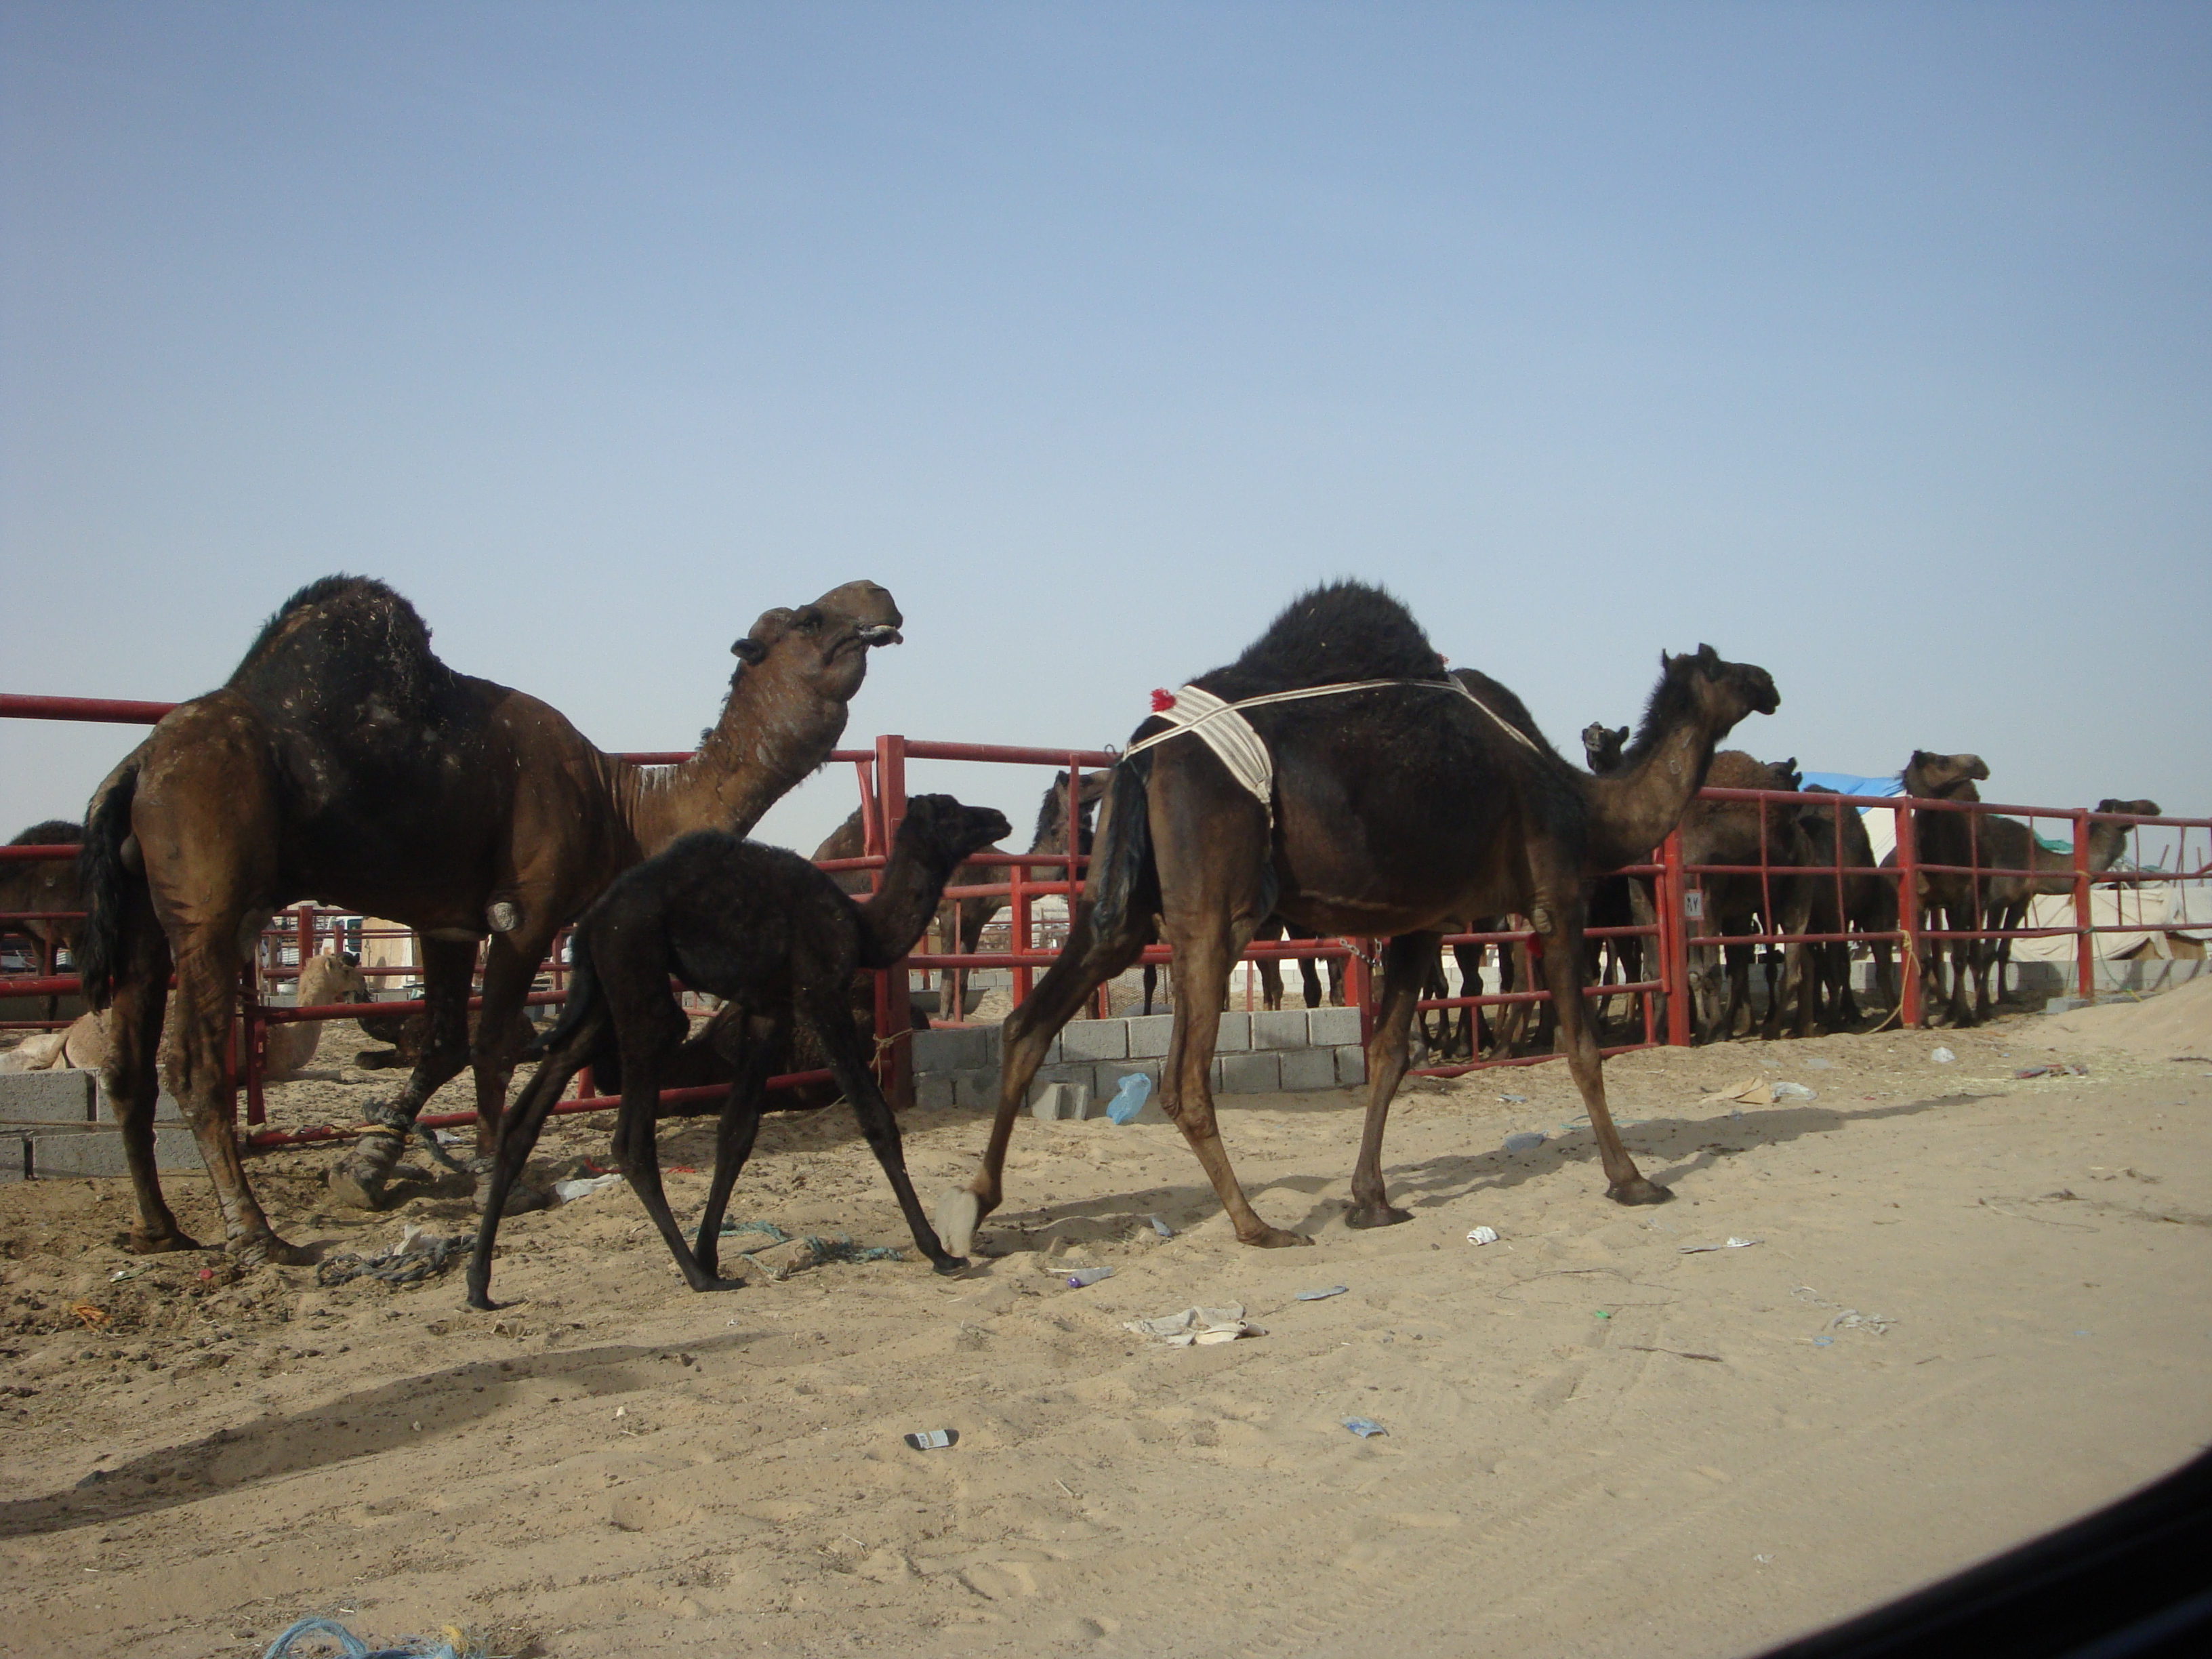 Camels meet many needs. From transportation and livelihoods, to a food source. The meat is common, and their milk is esteemed to. They will use it to bolster an undernourished baby.